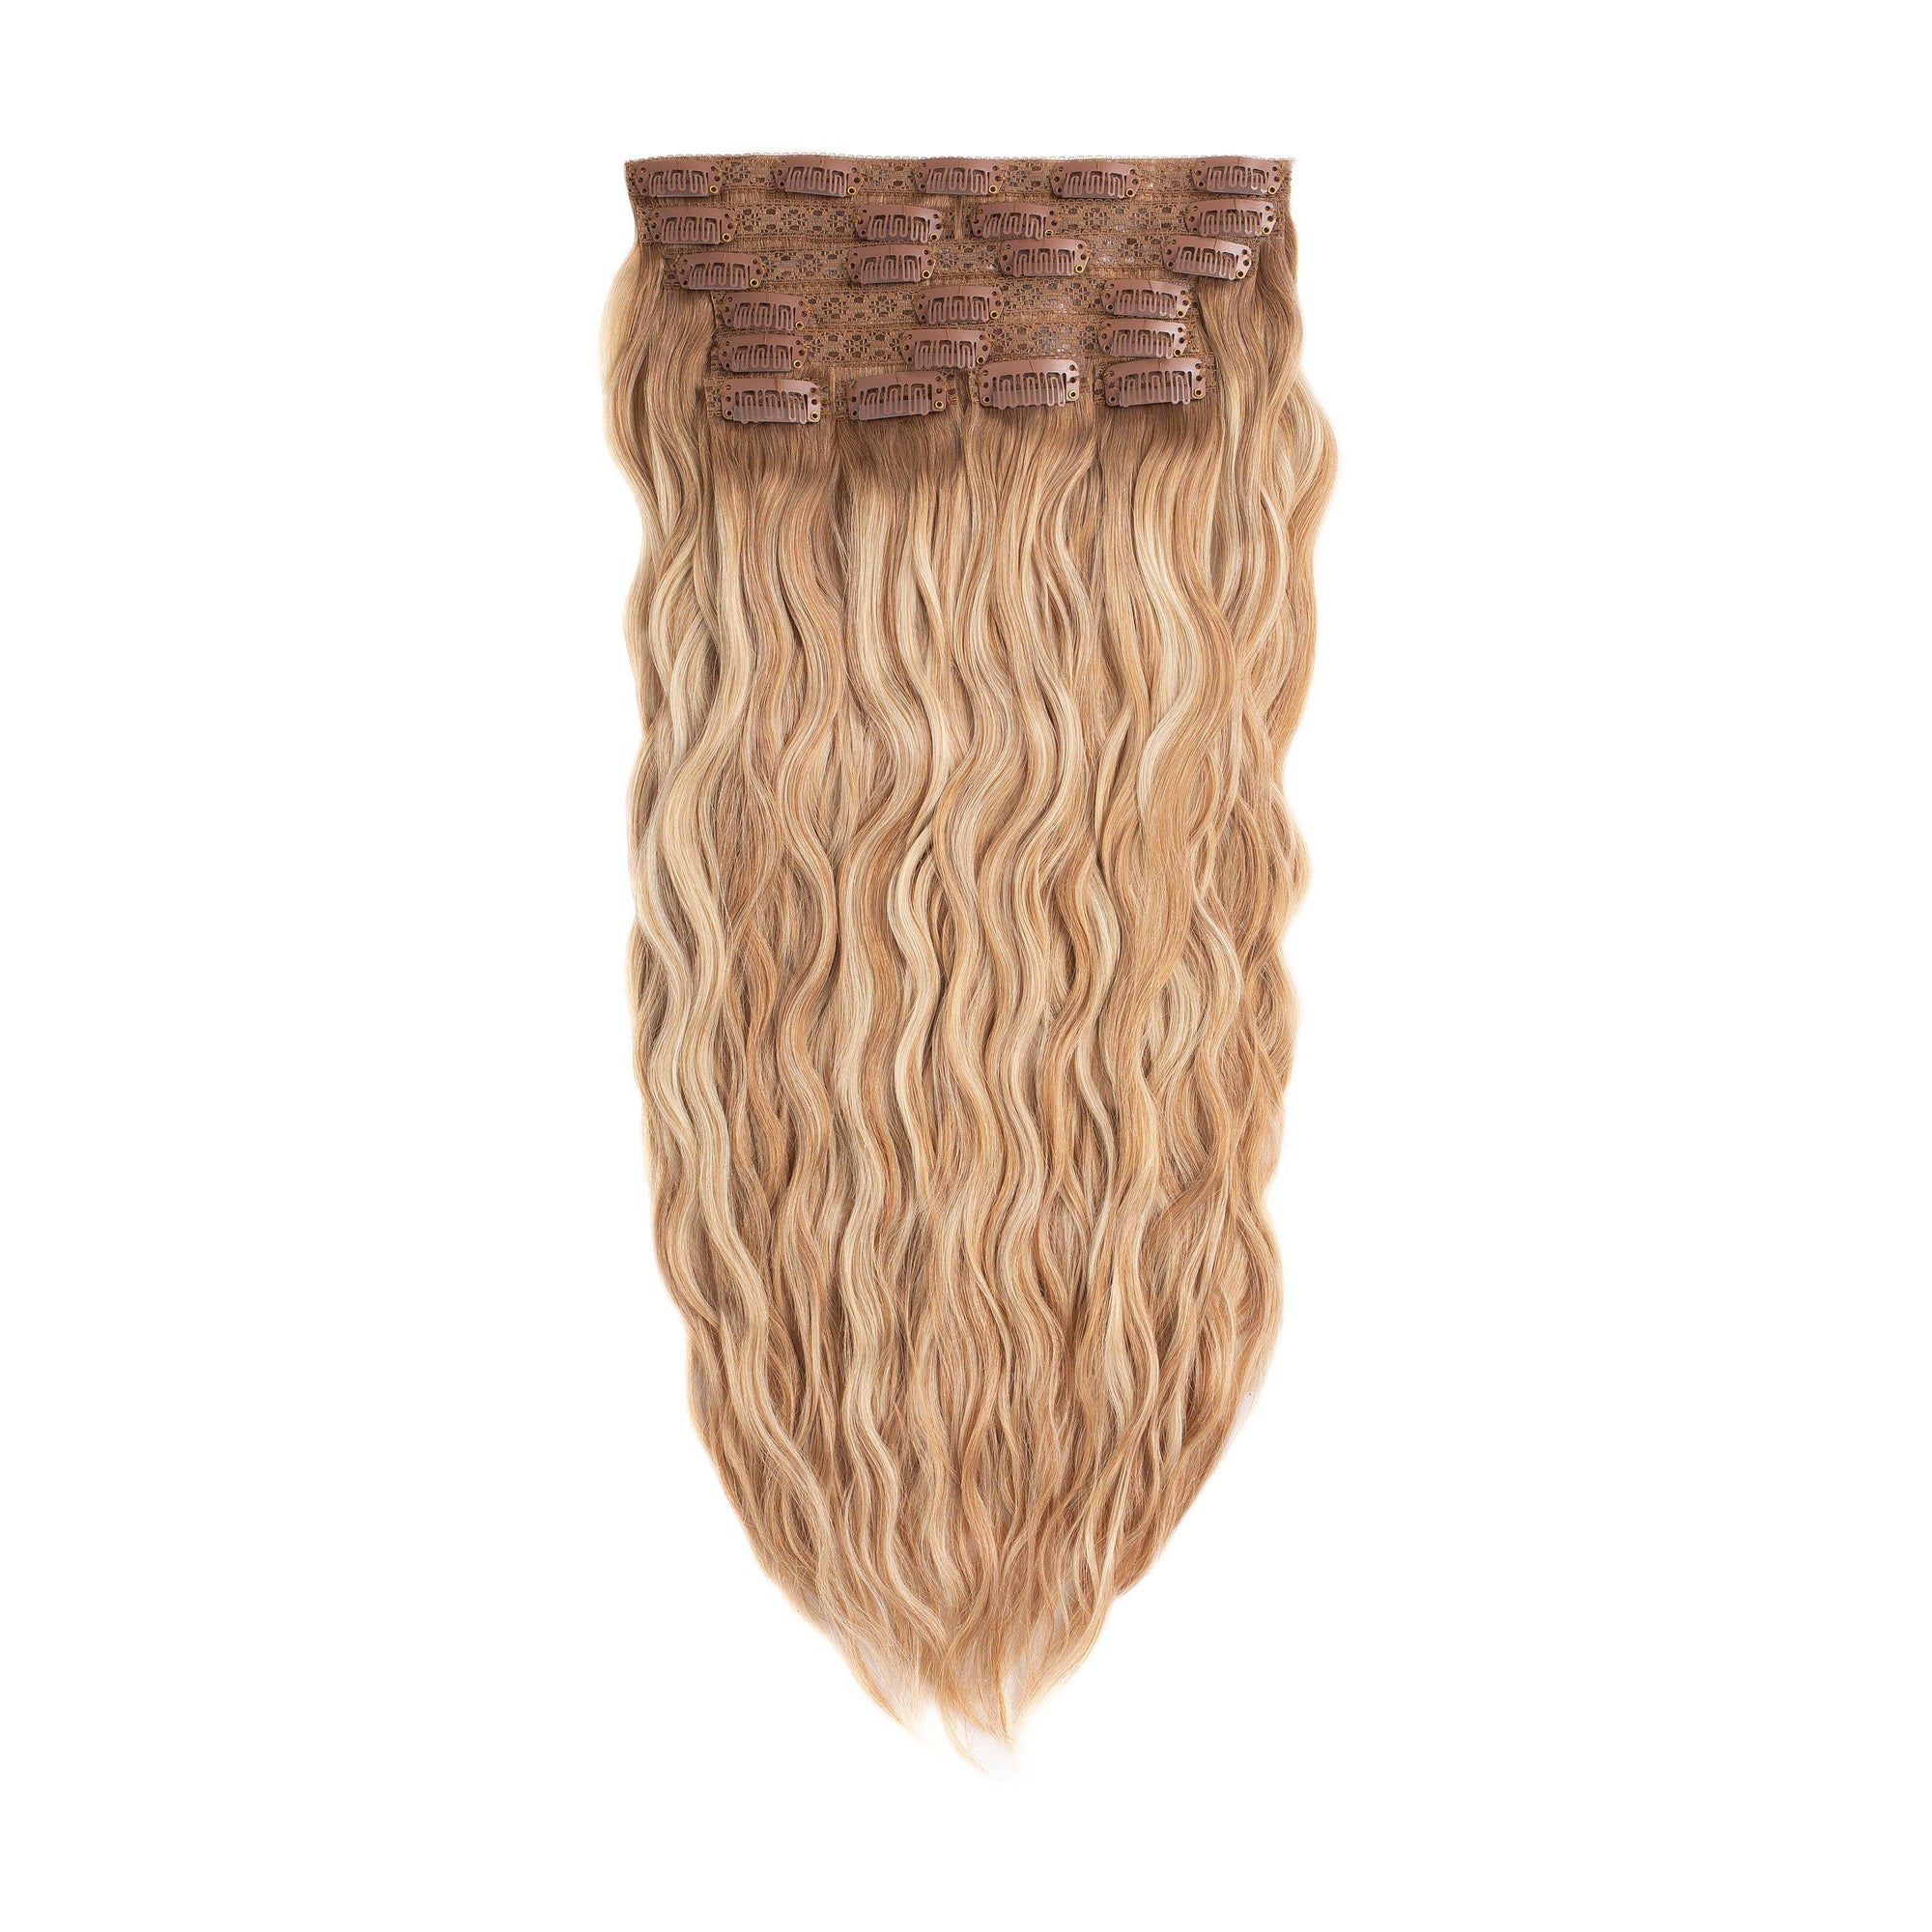 Glam Seamless Beach Wave Invisi Clip Rooted Ash Brown Highlights - RH9/613